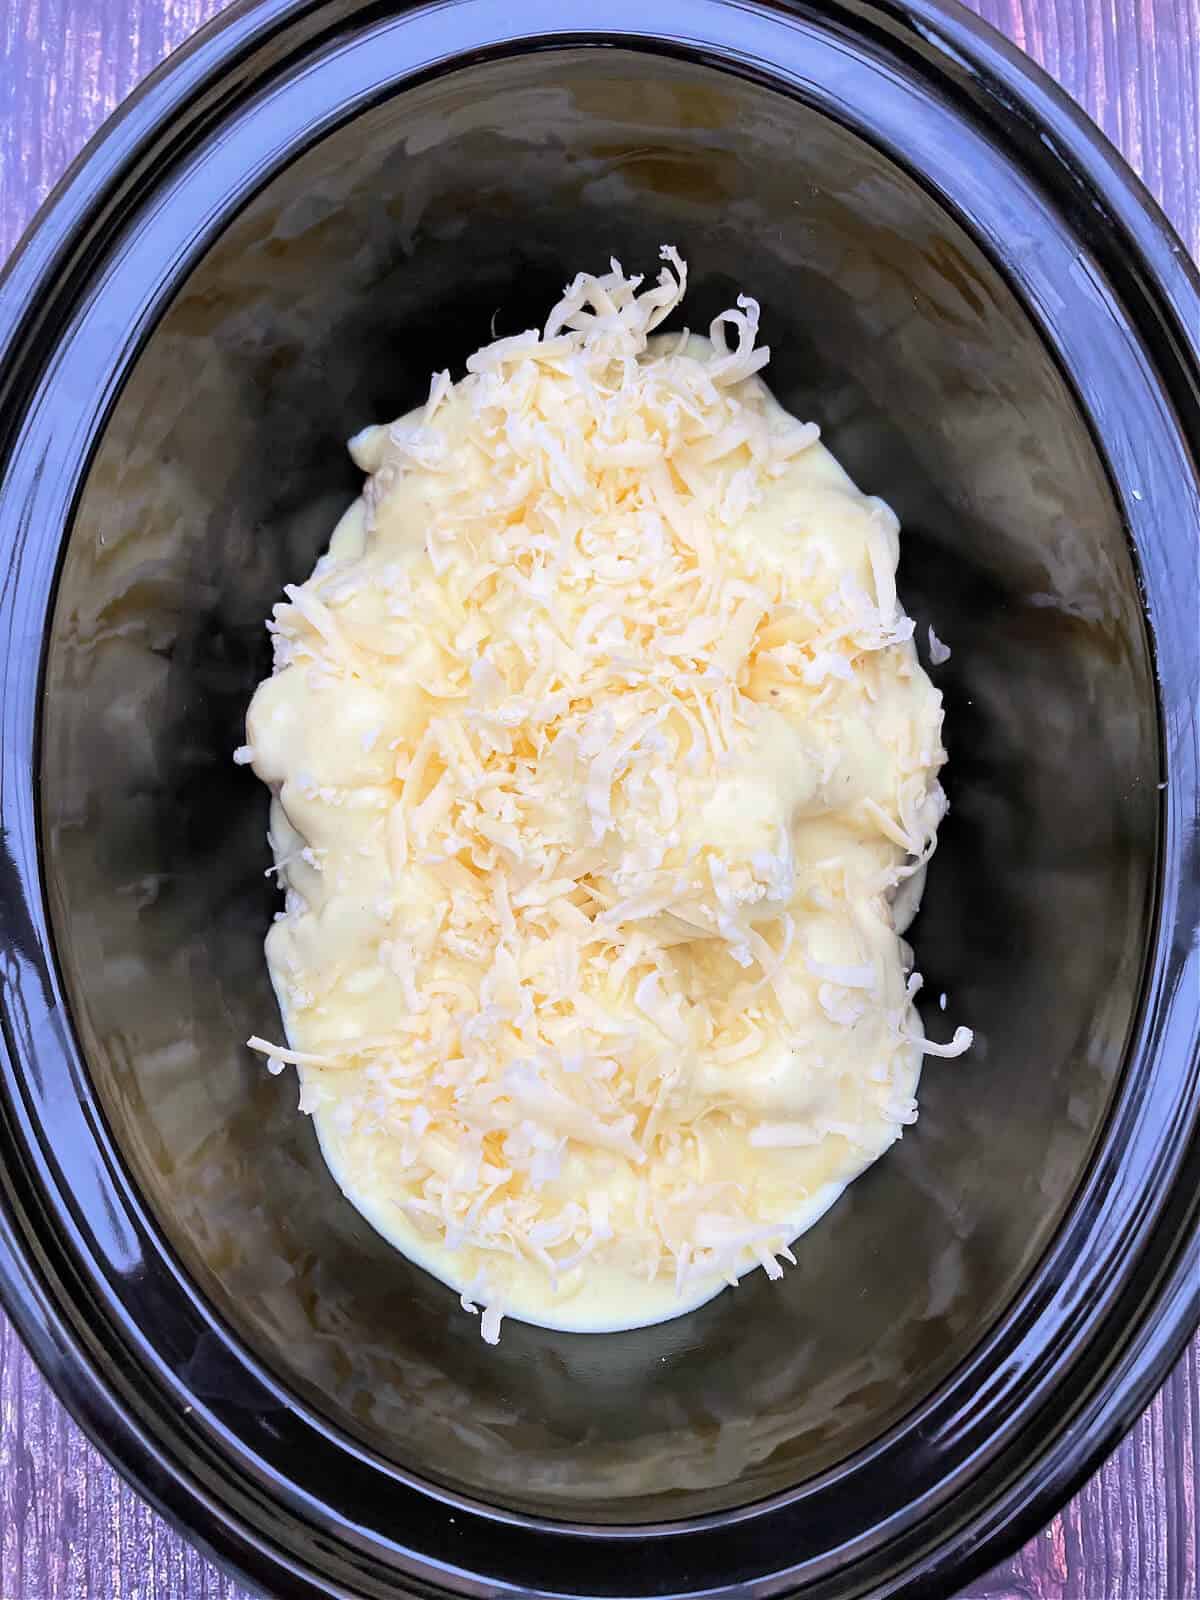 Cauliflower cheese mixture with grated cheese on top, in slow cooker pot.